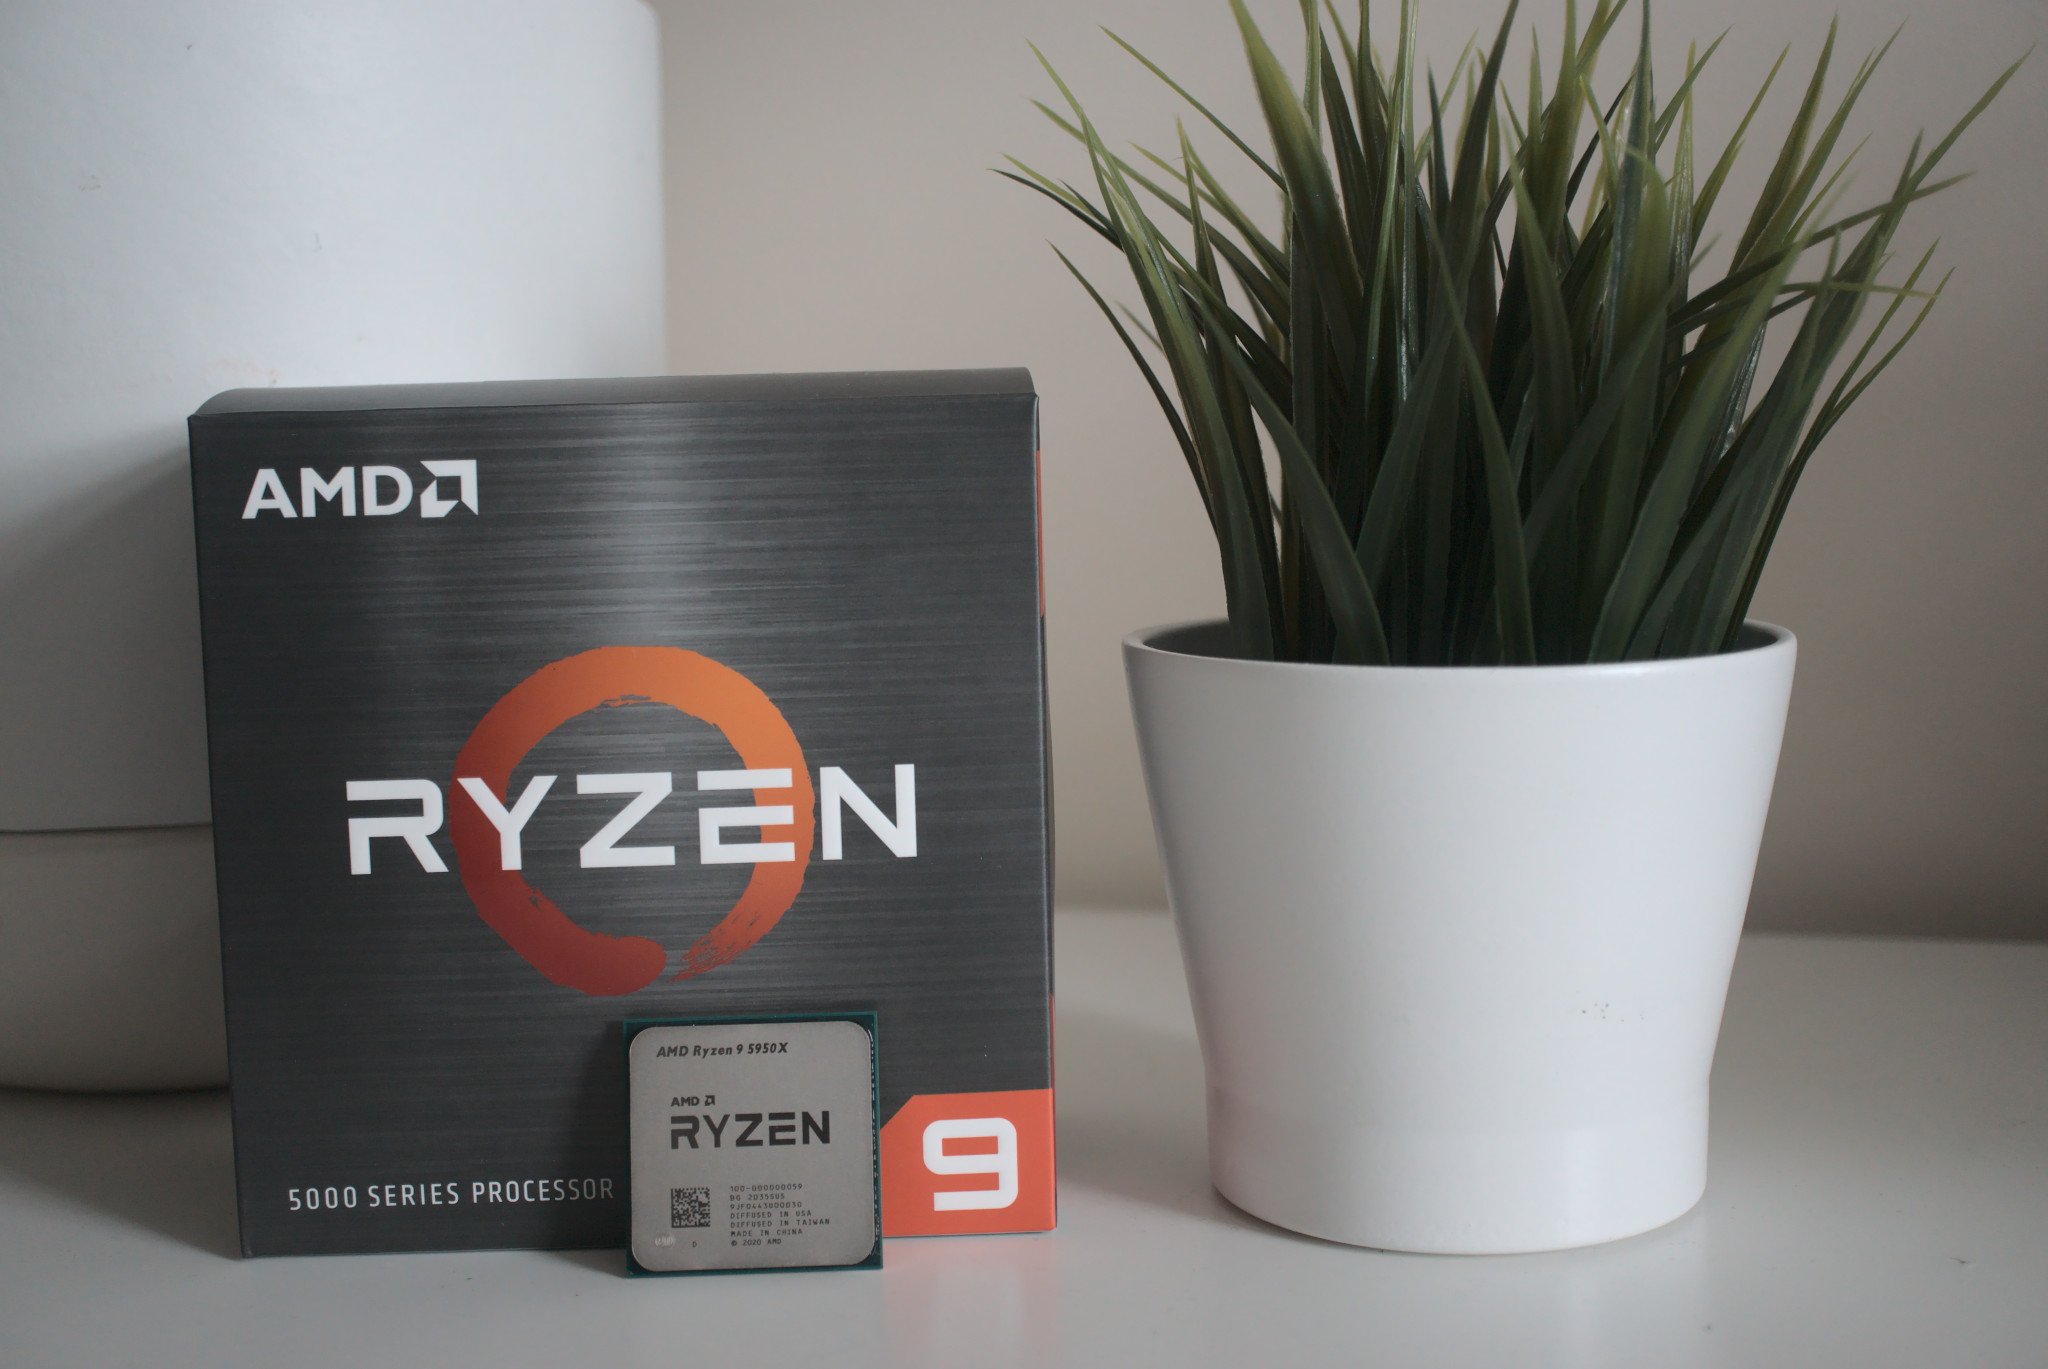 AMD Ryzen 9 5950X review: This monstrous CPU is overkill for